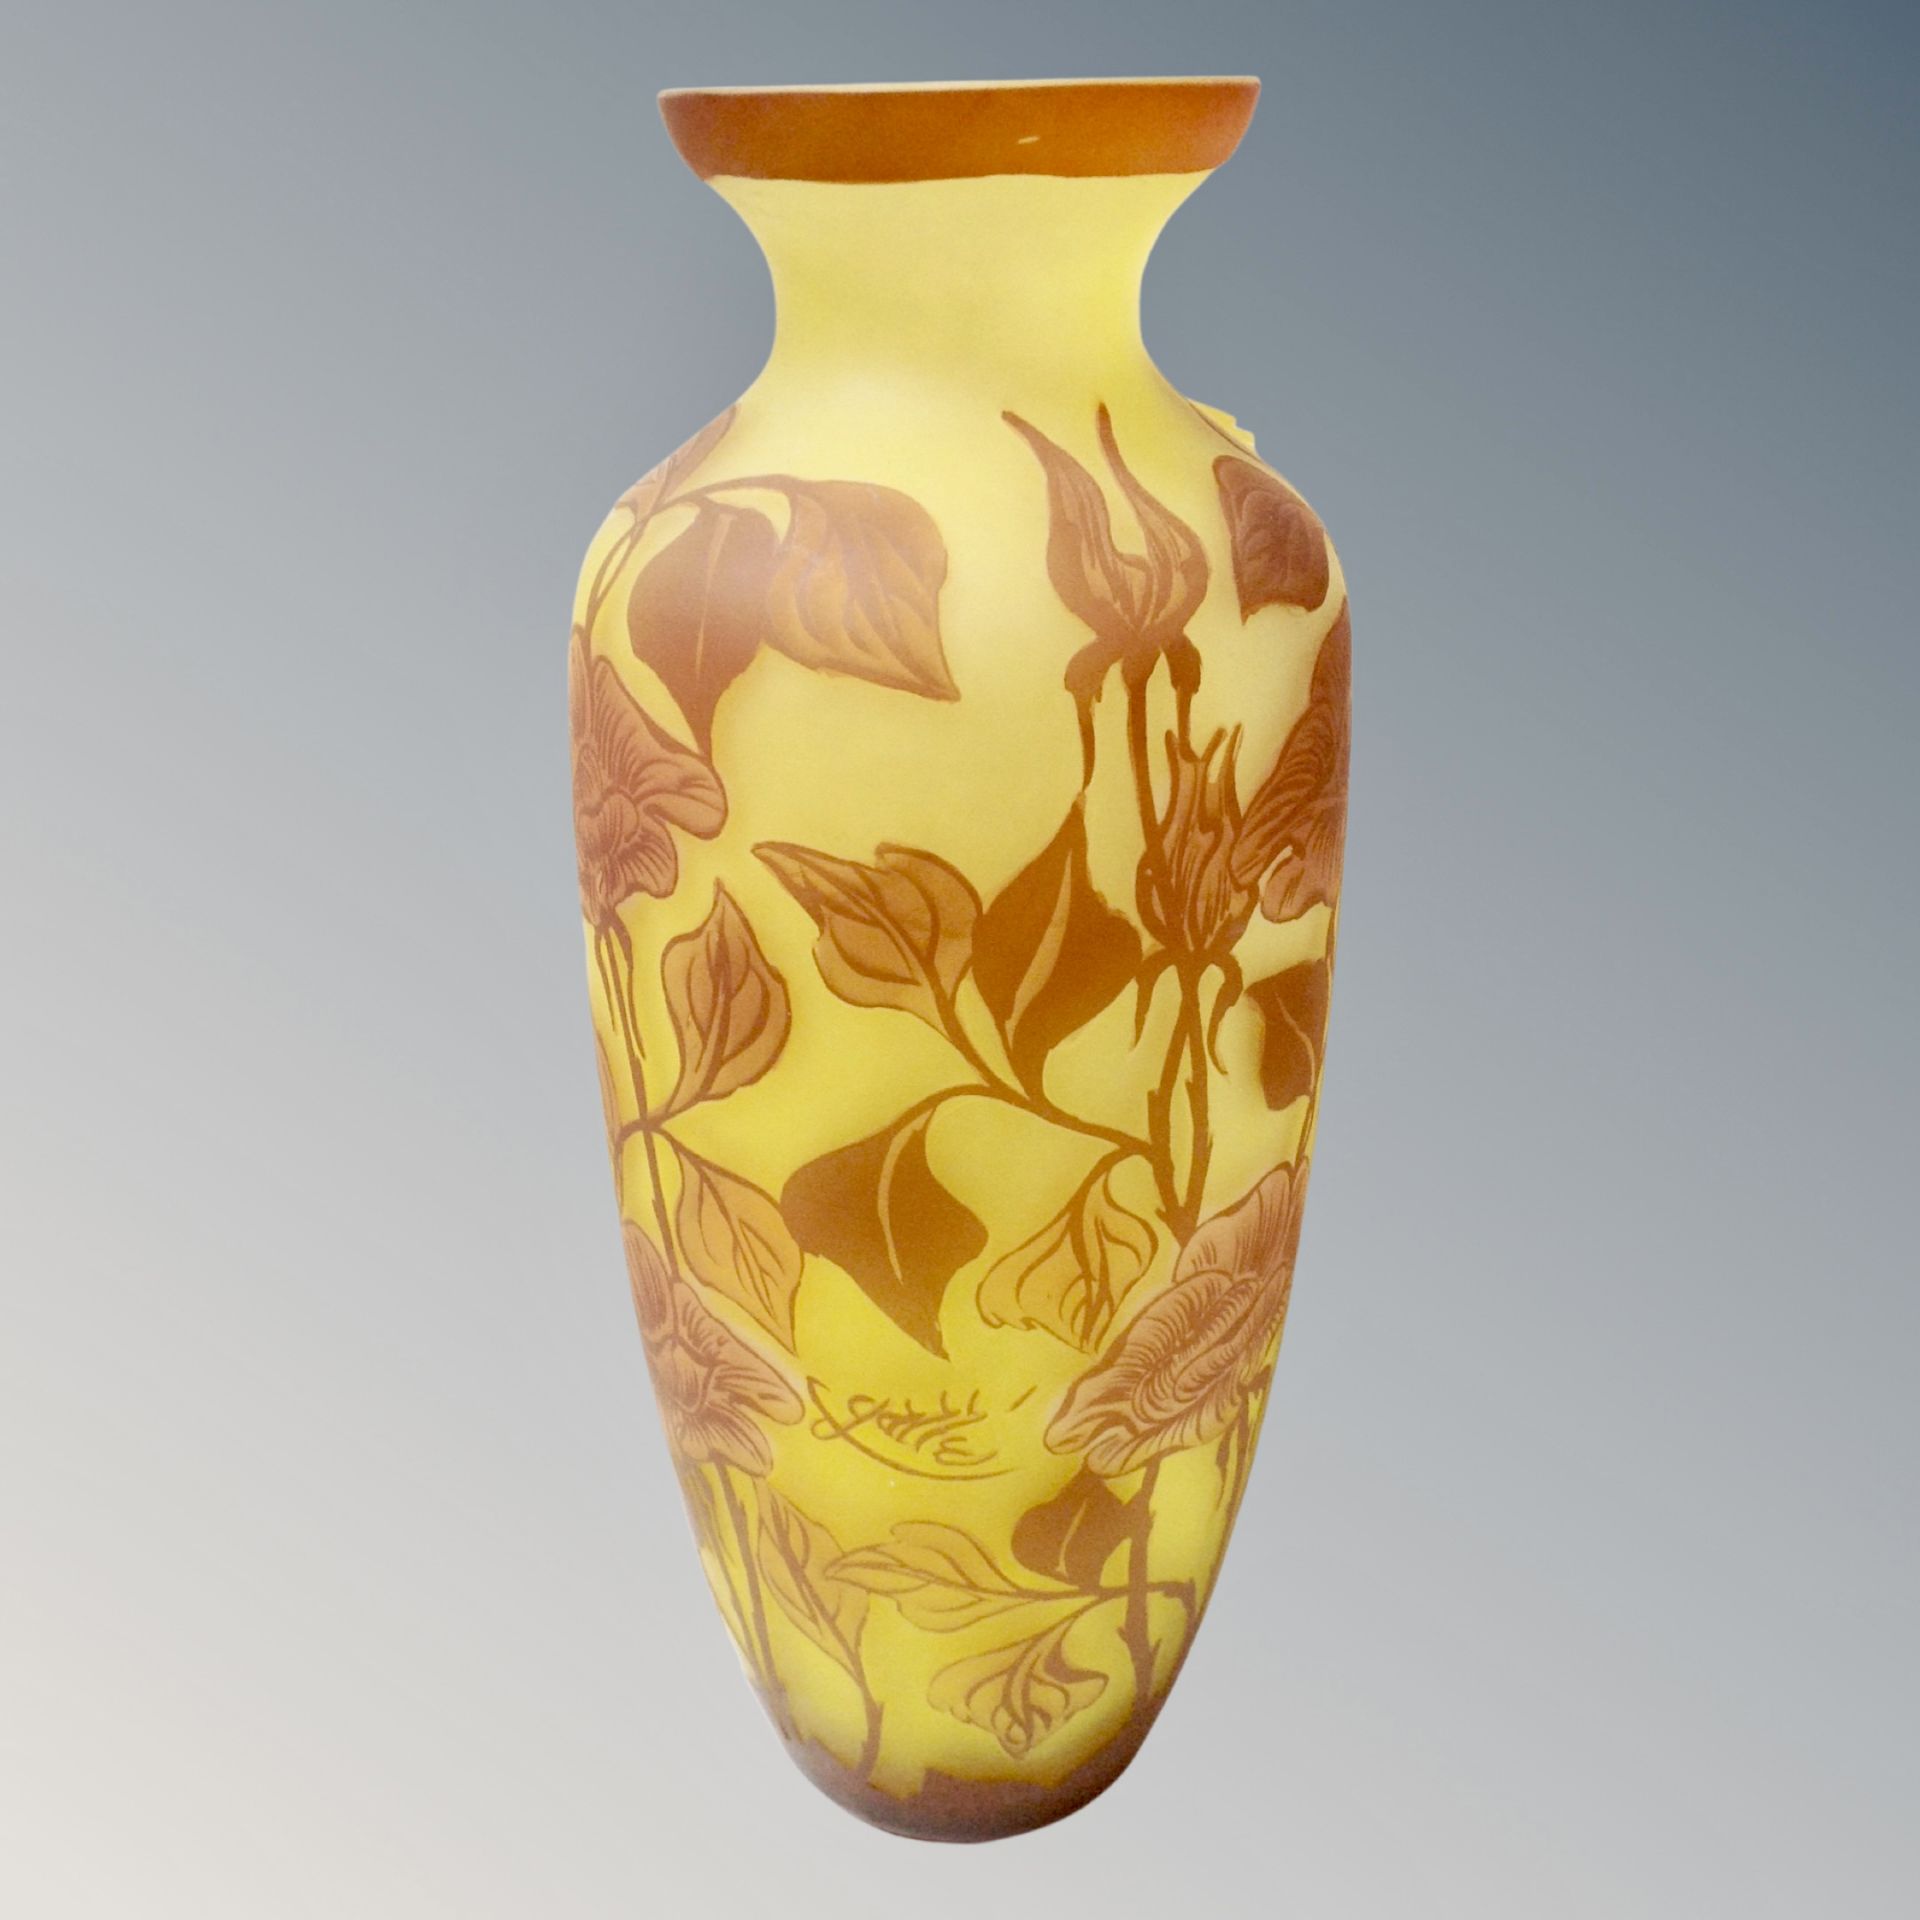 A reproduction Gallé glass vase, height 32.